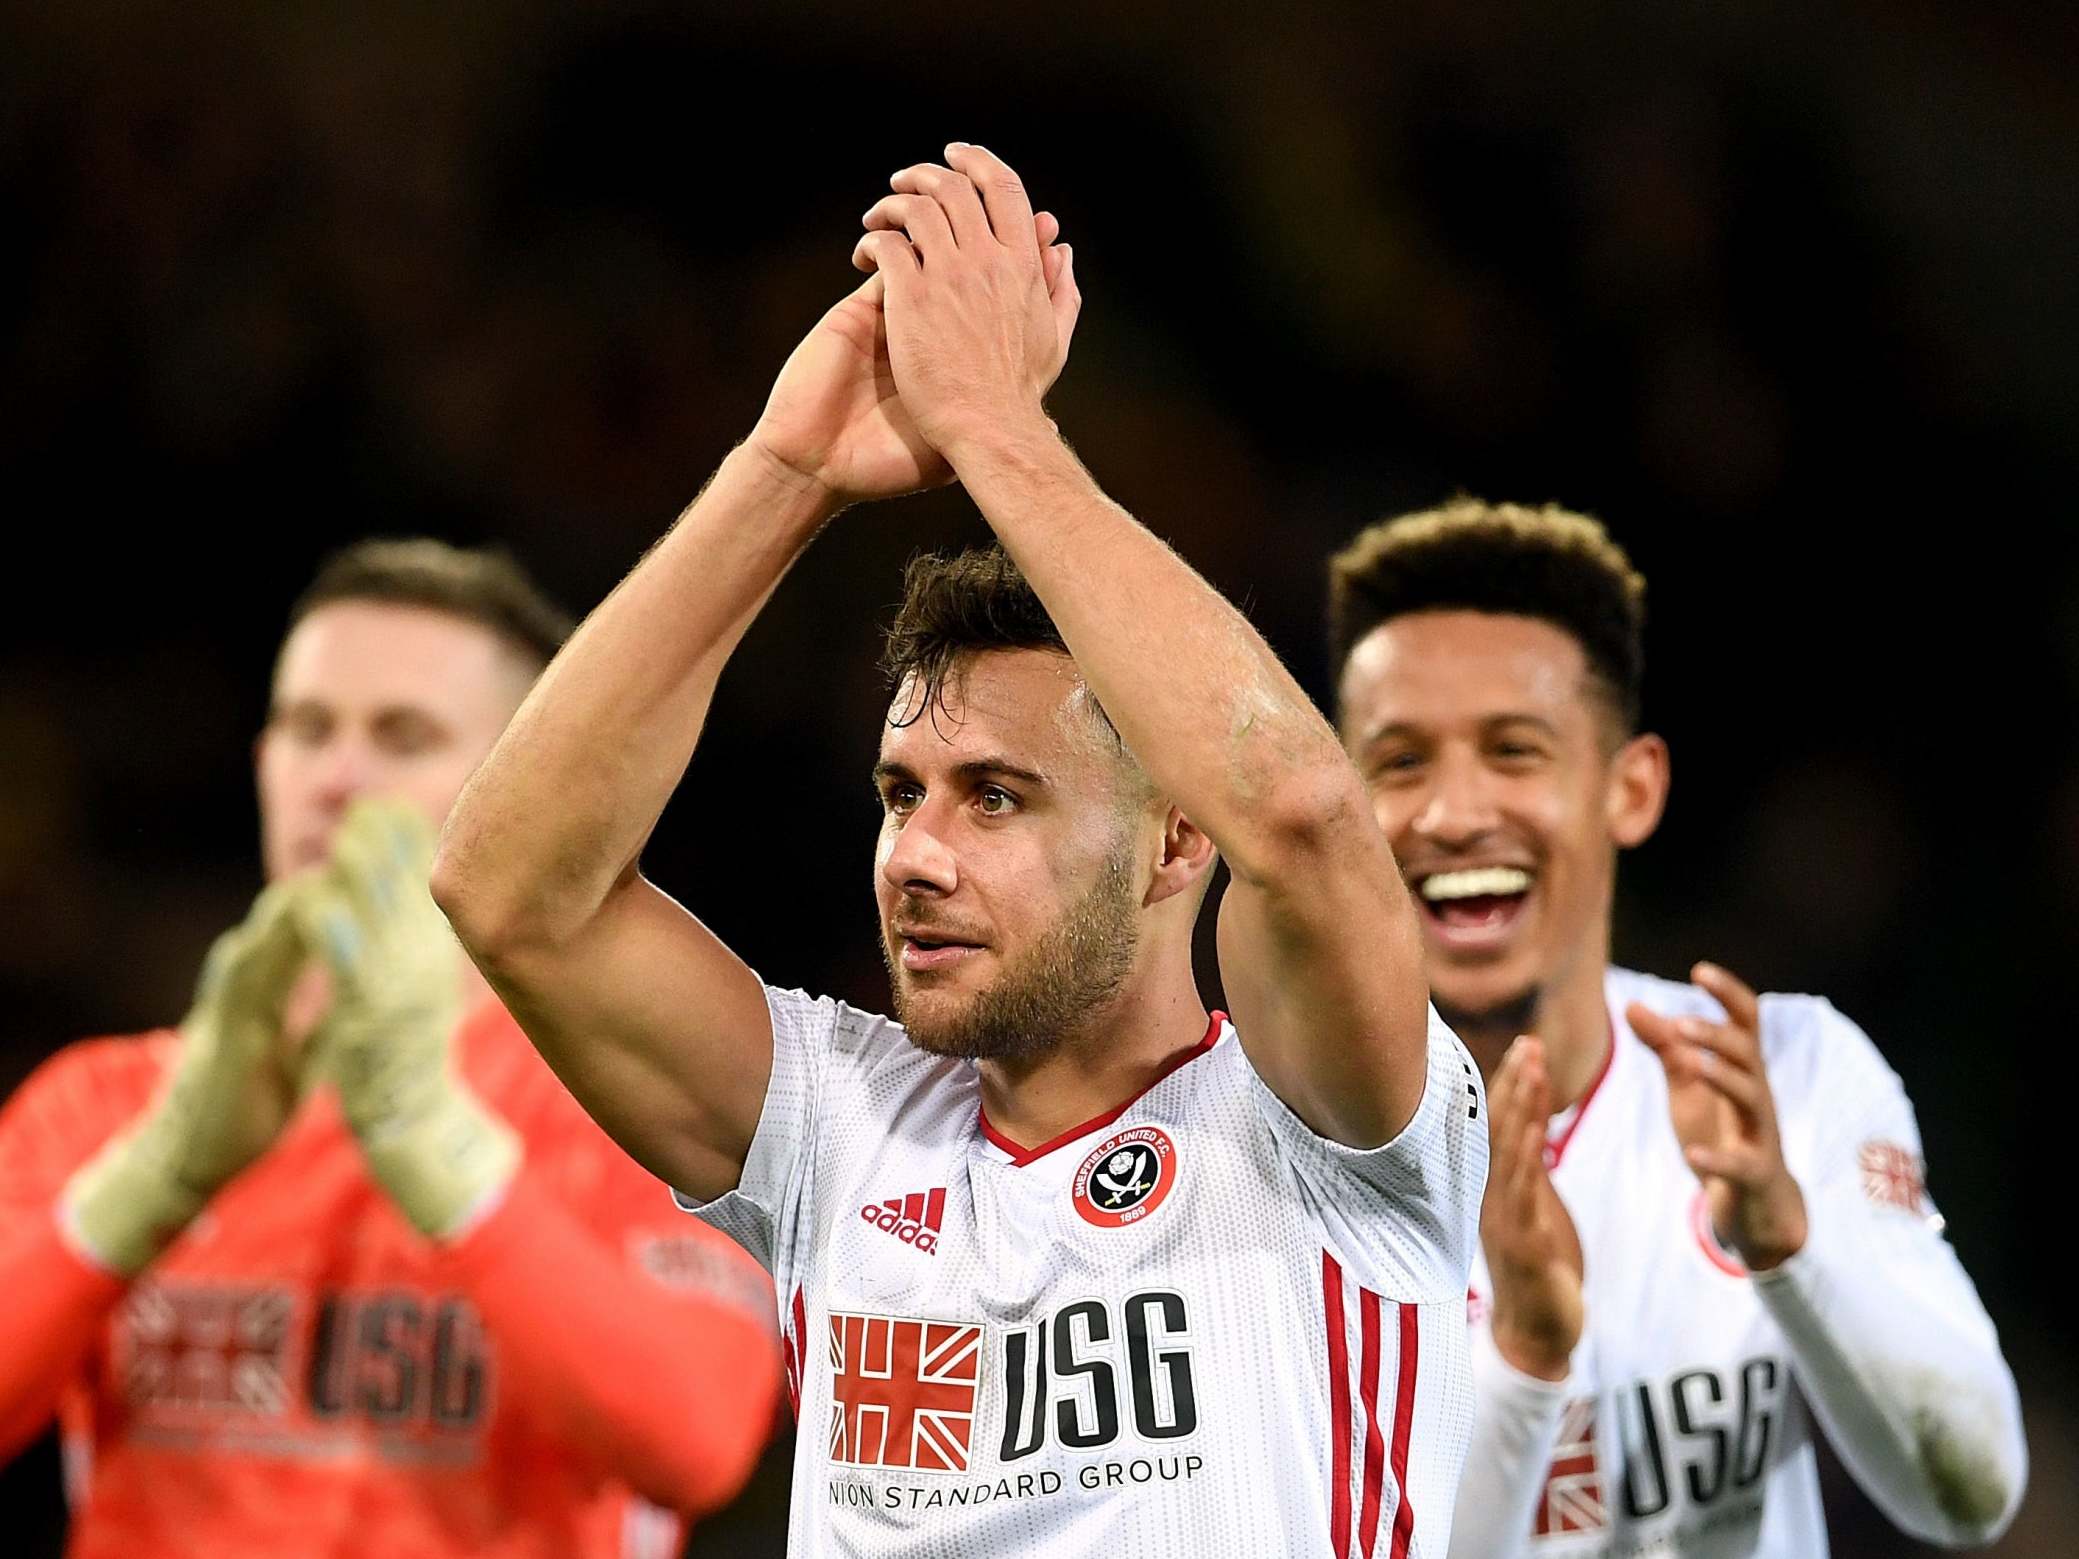 Sheffield United bounce back at Norwich as Newcastle extend fine run by beating Southampton